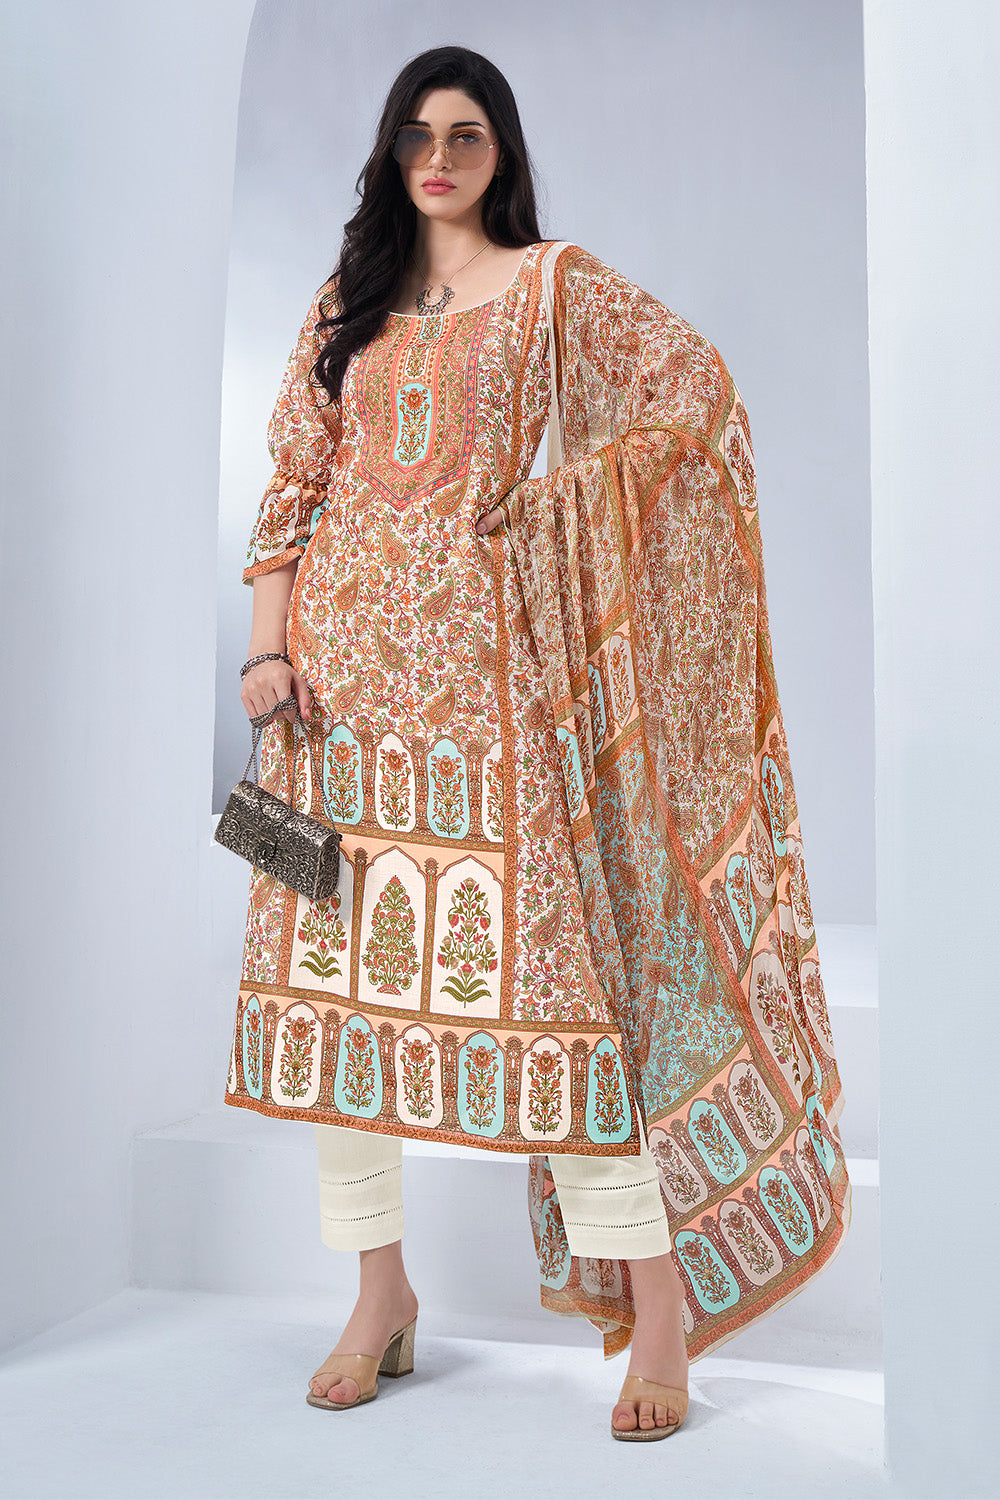 White & Rust Color Digital Printed Cotton Unstitched Suit Material